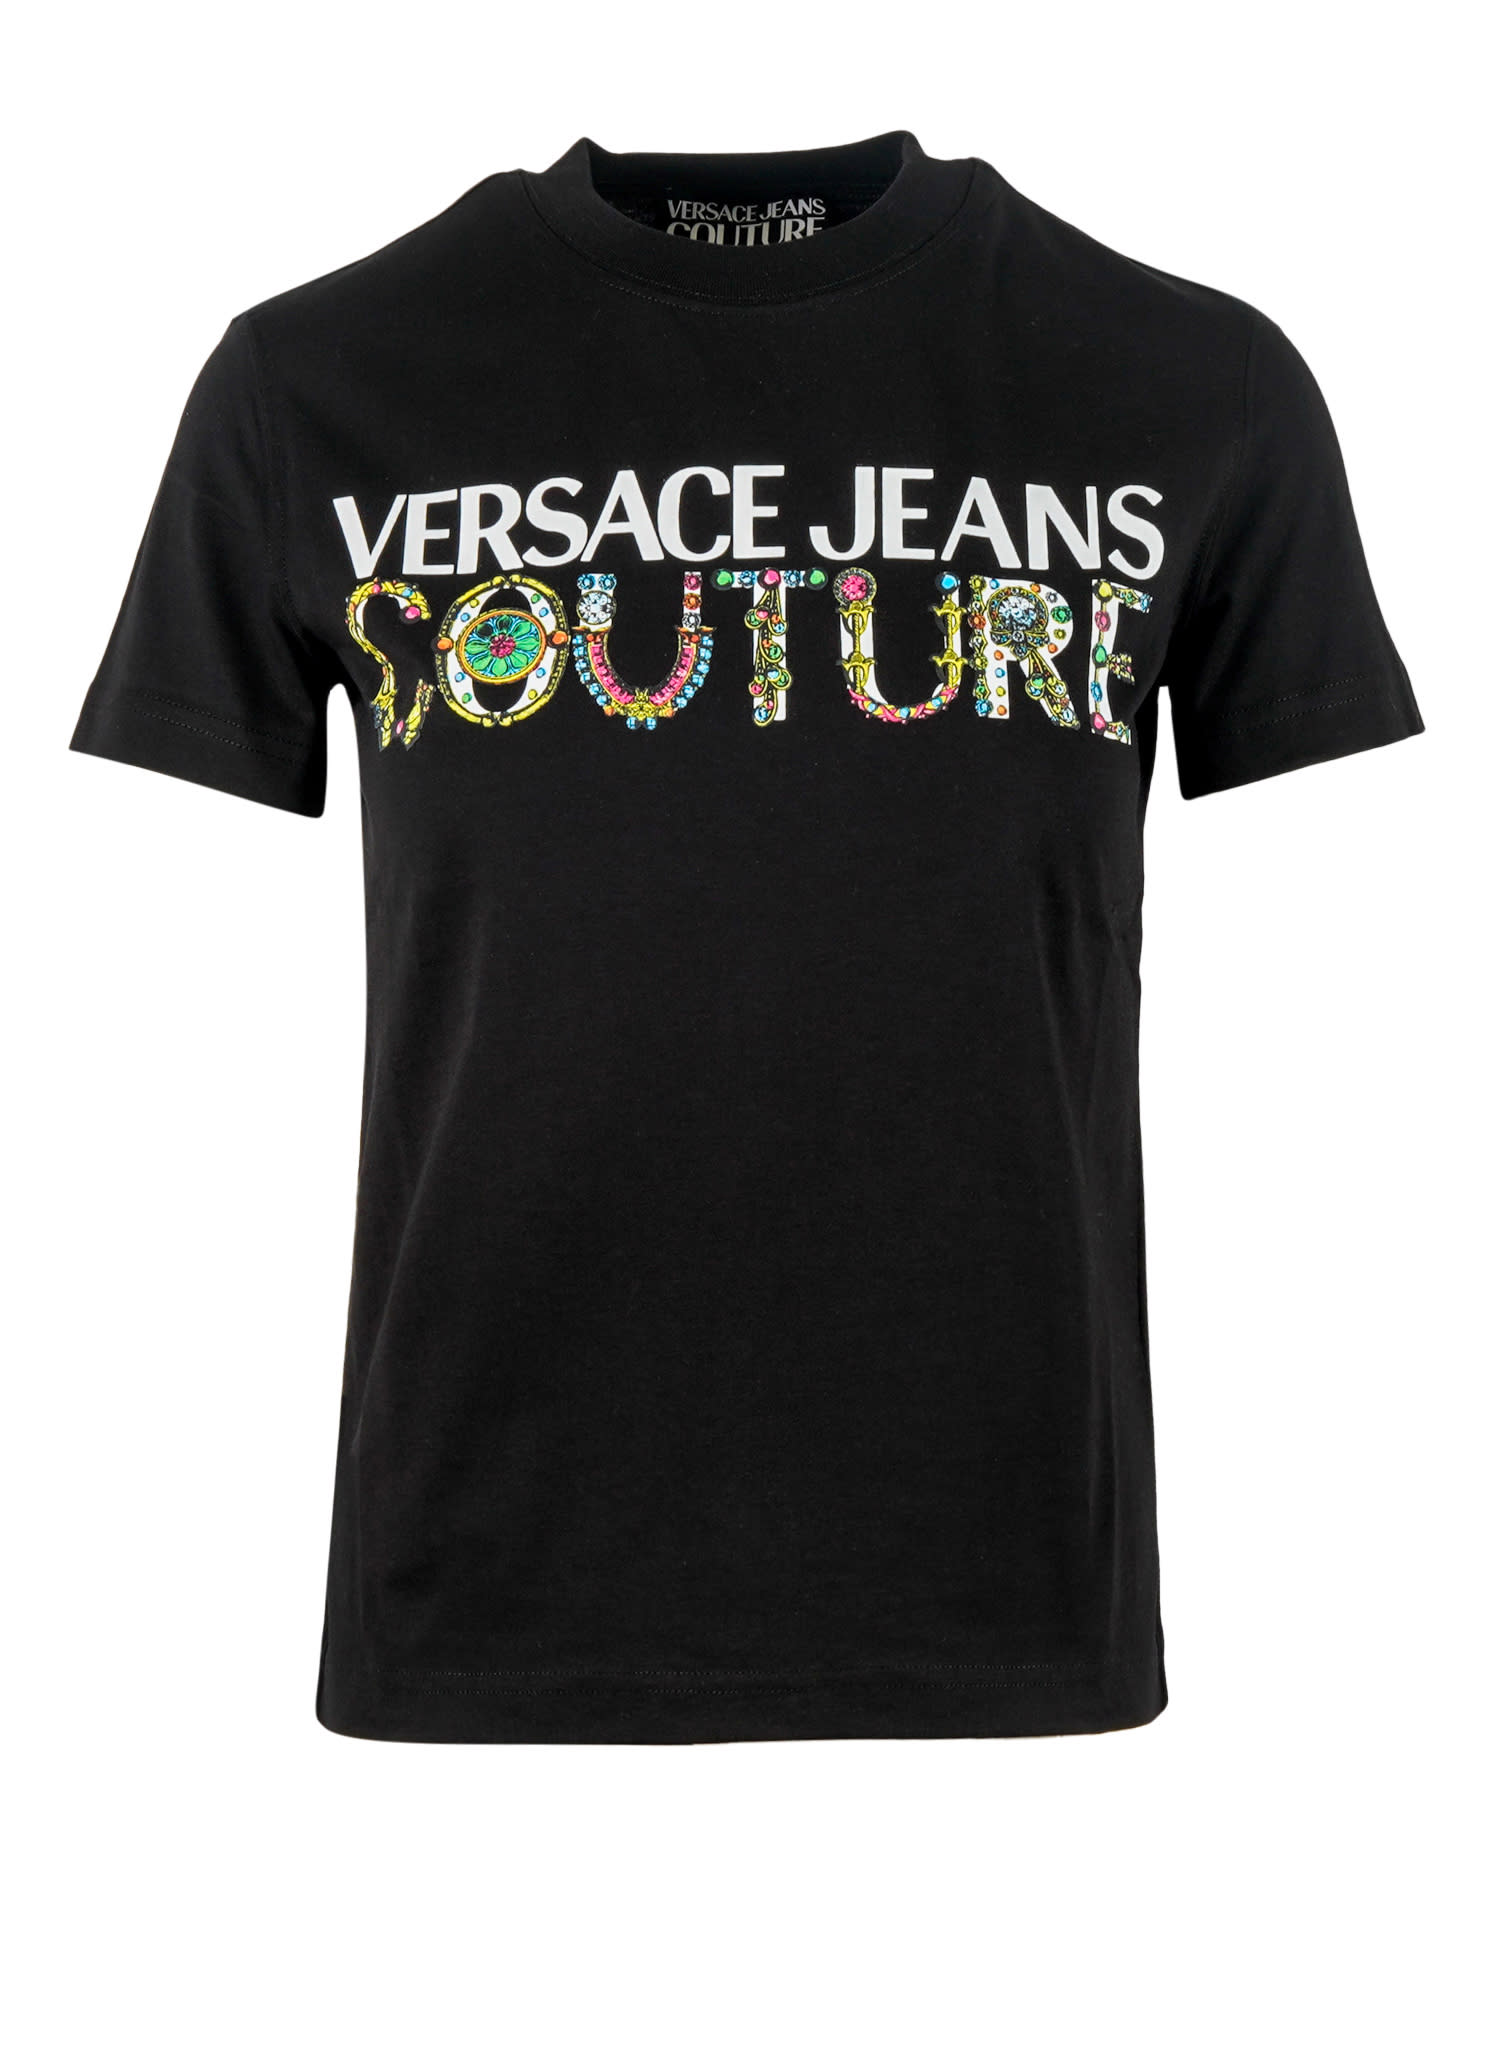 Versace Jeans Couture Tshirt T-shirt